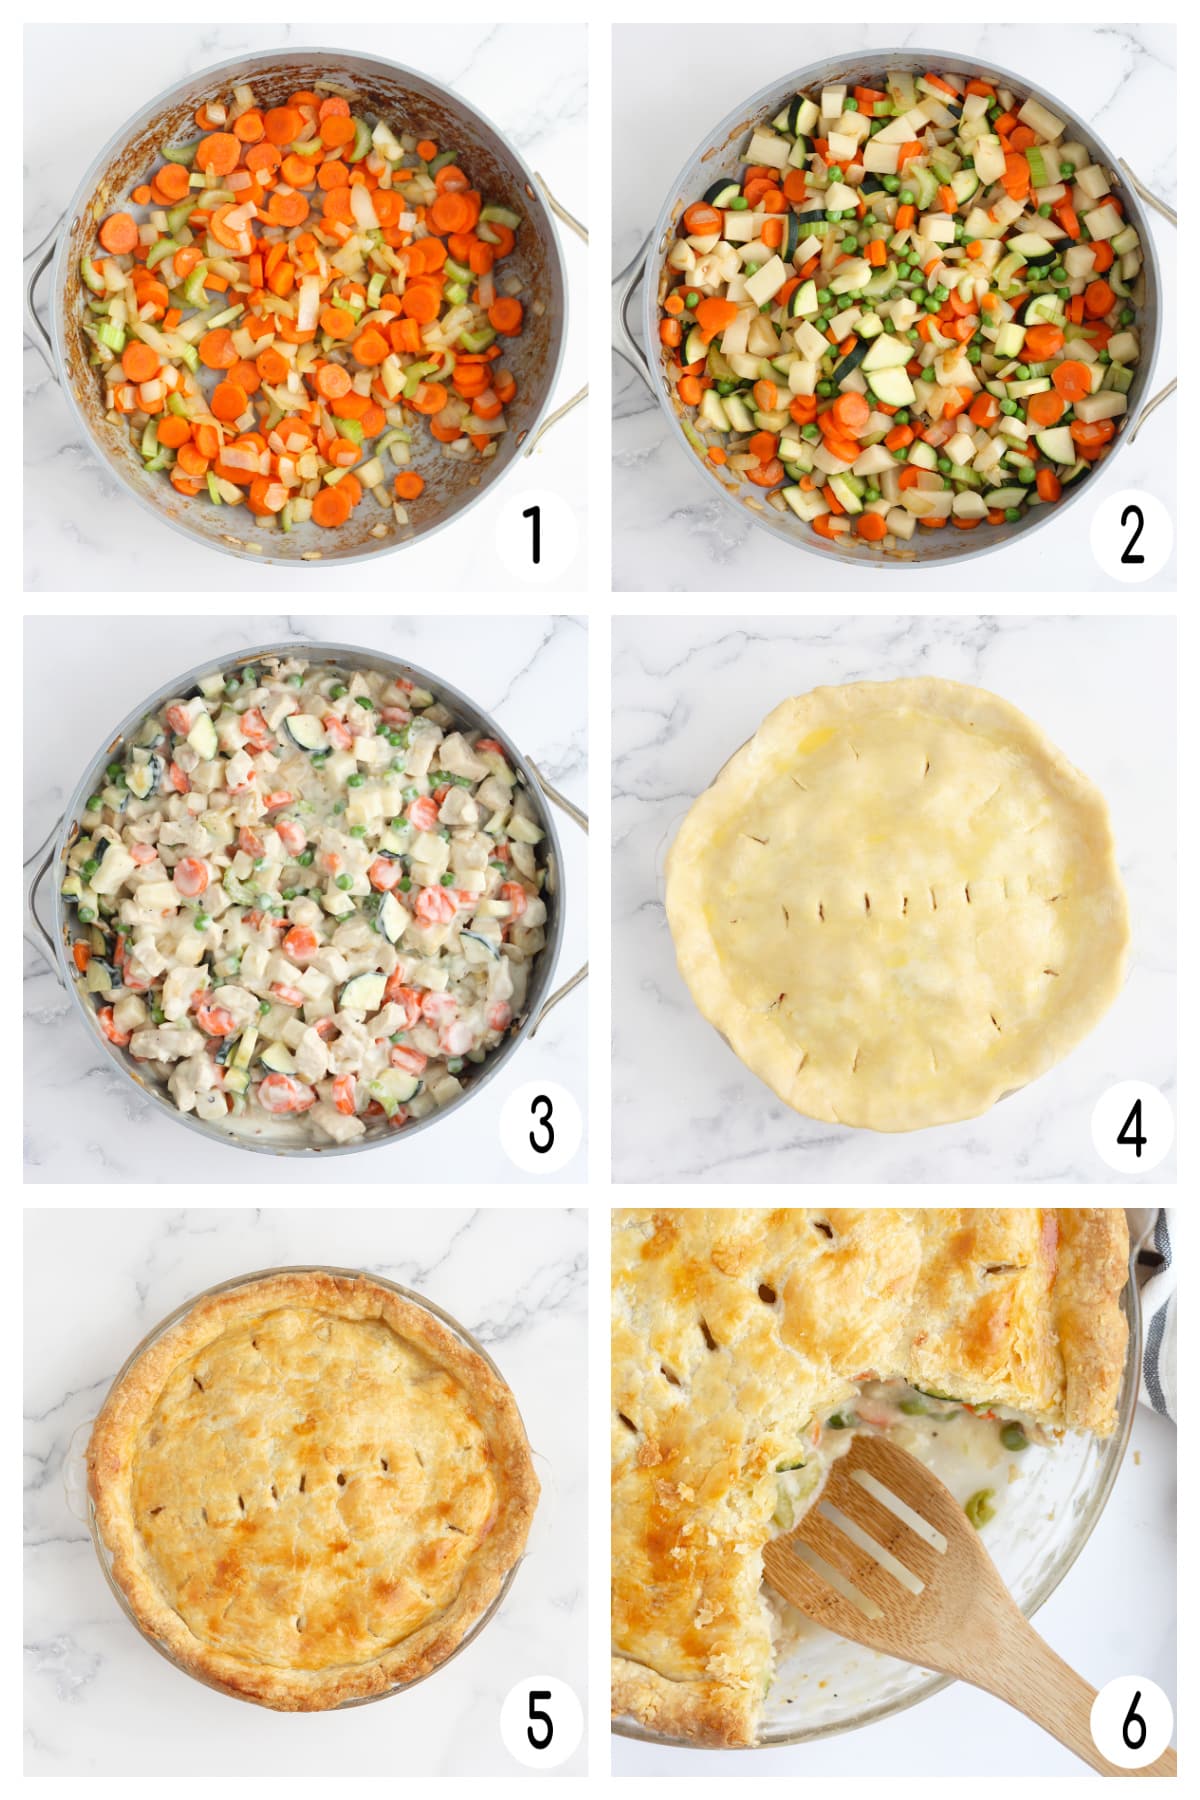 Images showing how to make homemade chicken pot pie.